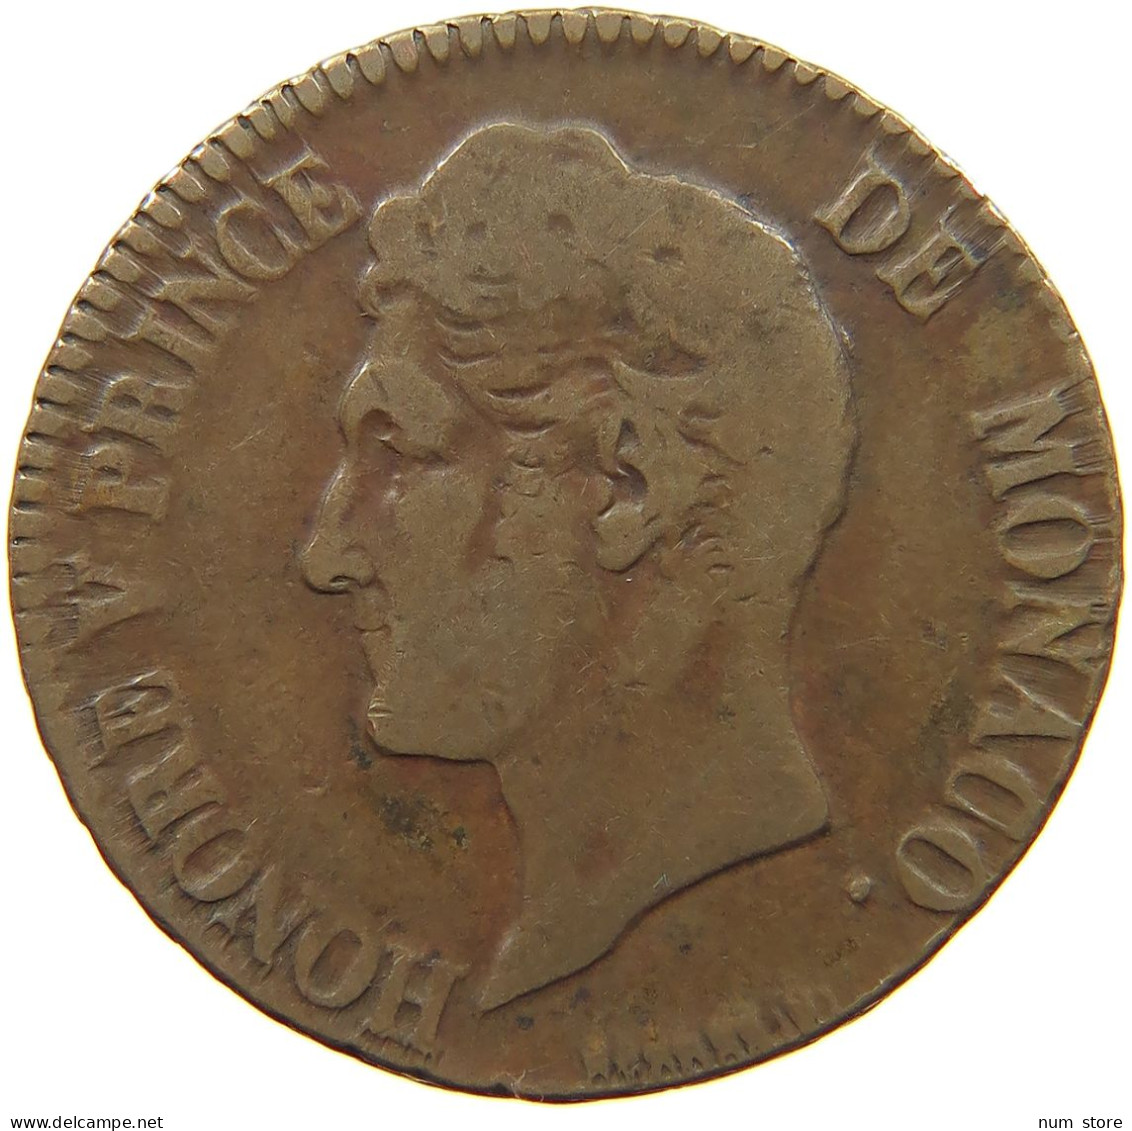 MONACO 5 CENTIMES 1837 C HONORE V., 1819-1841 #MA 021686 - 1505-1795 From Lucien Ier To Honoré III